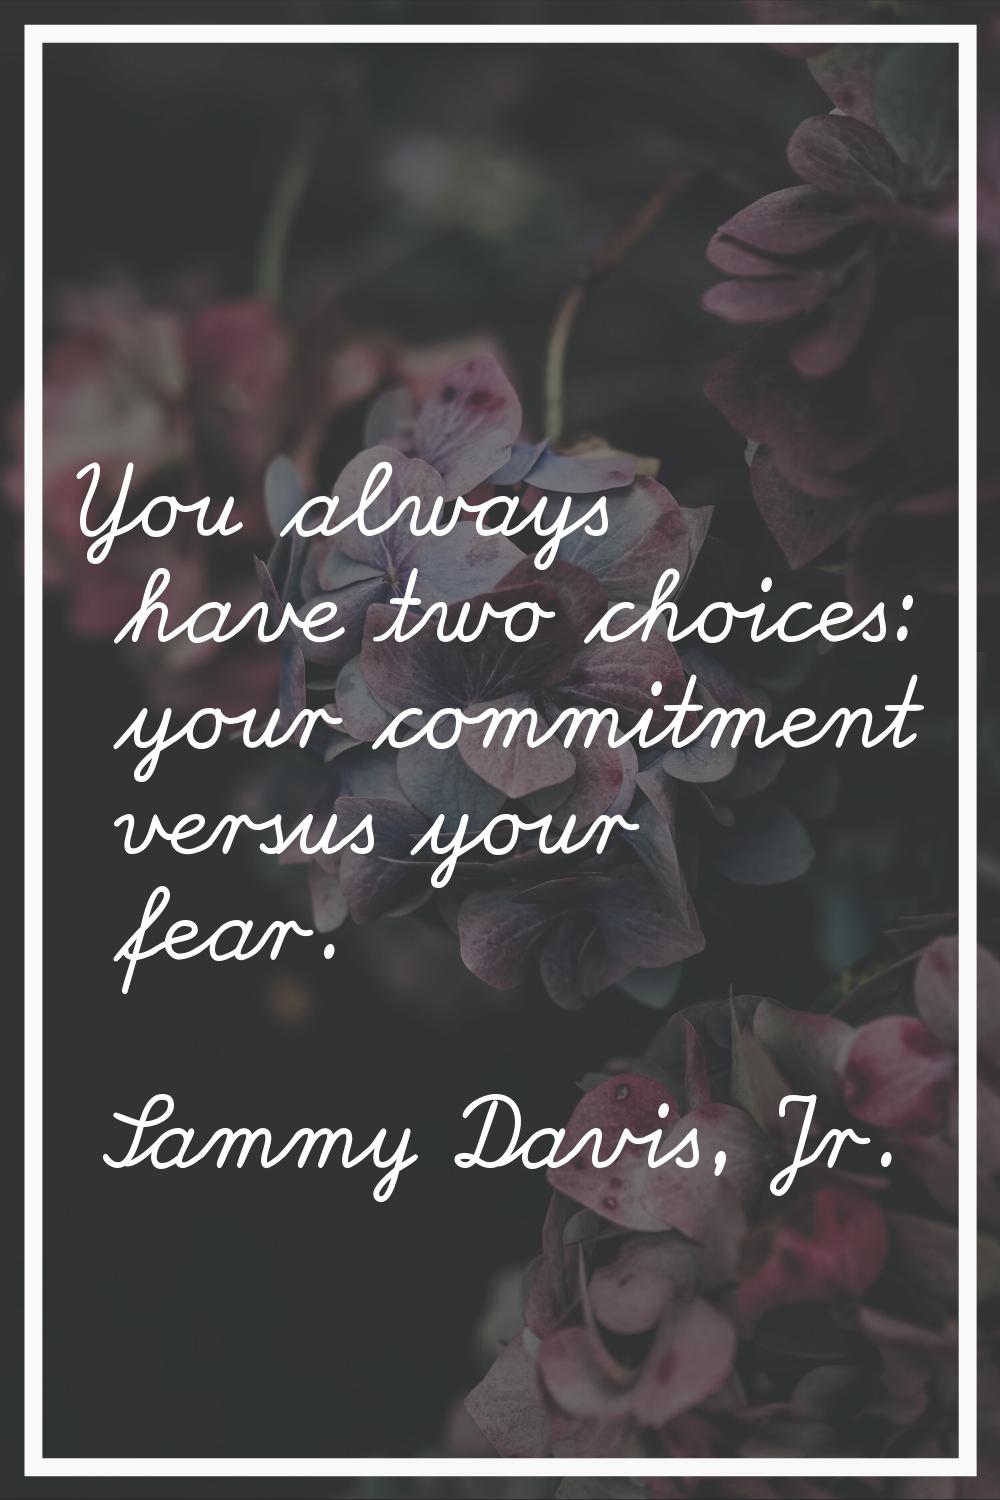 You always have two choices: your commitment versus your fear.